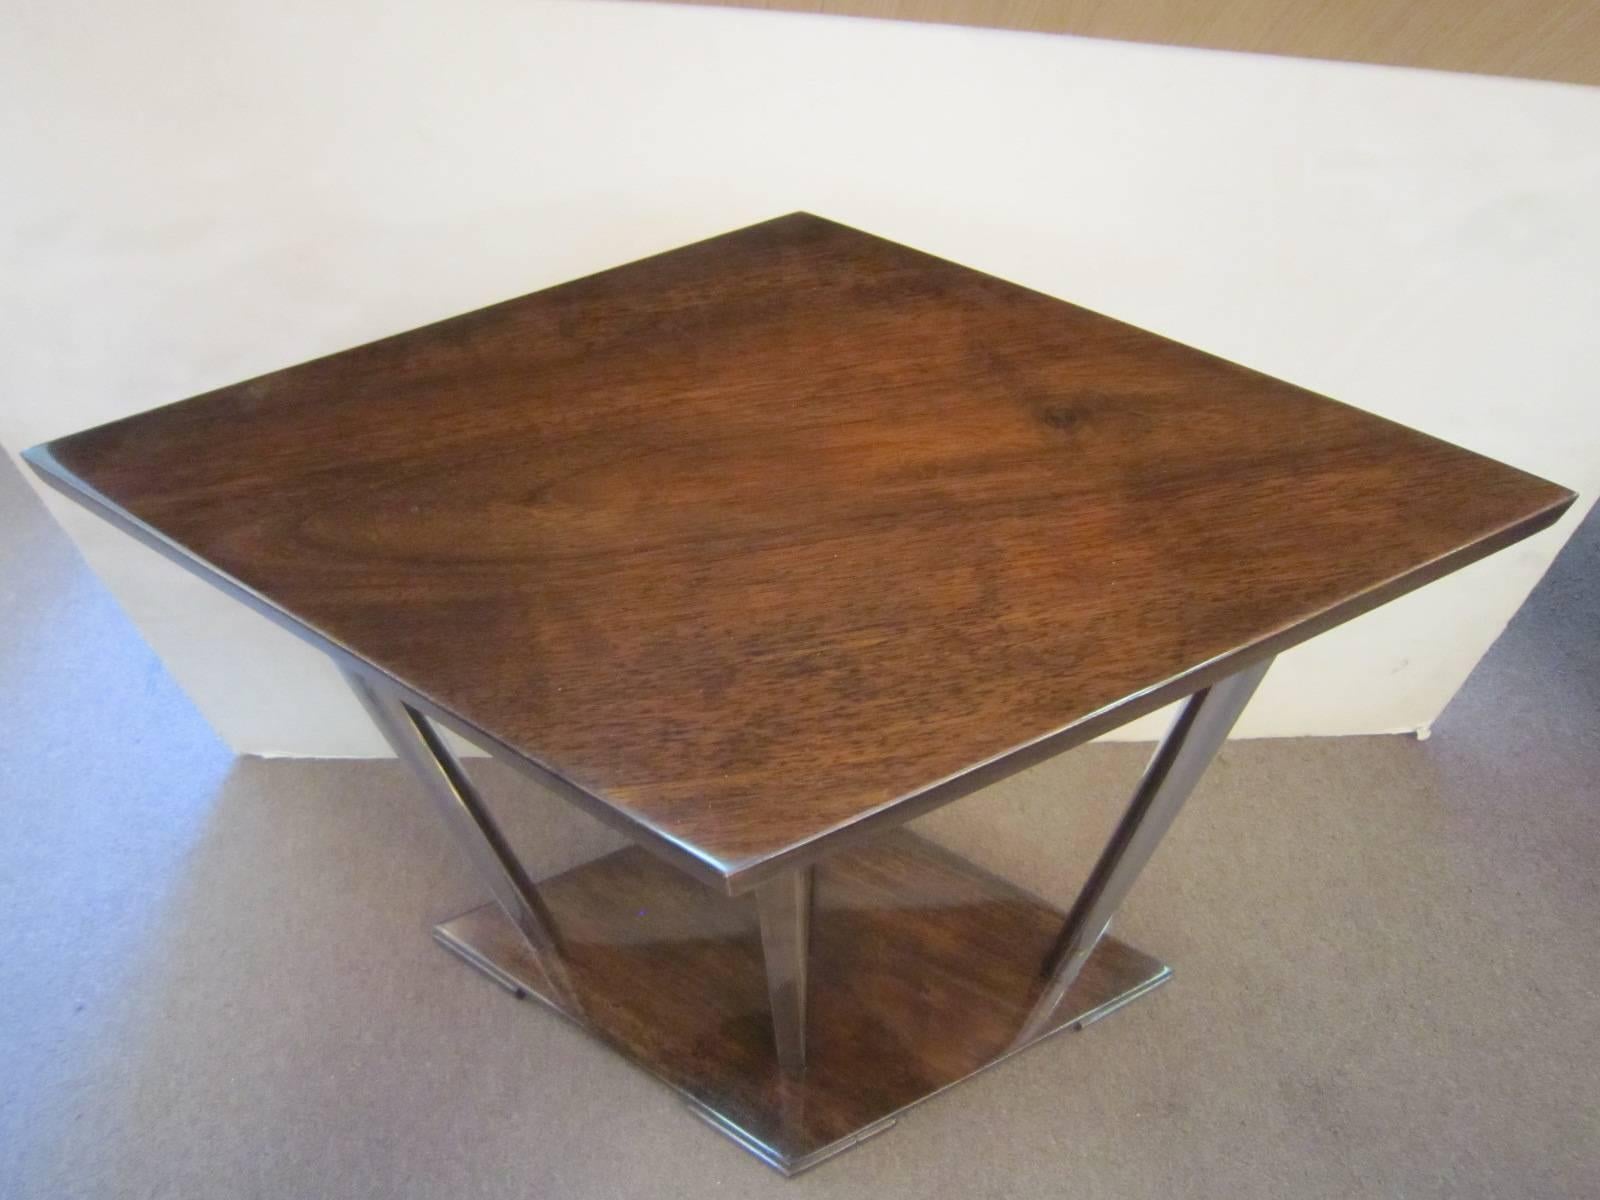 French Art Deco Unusual Diamond Shaped Walnut Side Table with Nickel Supports For Sale 6